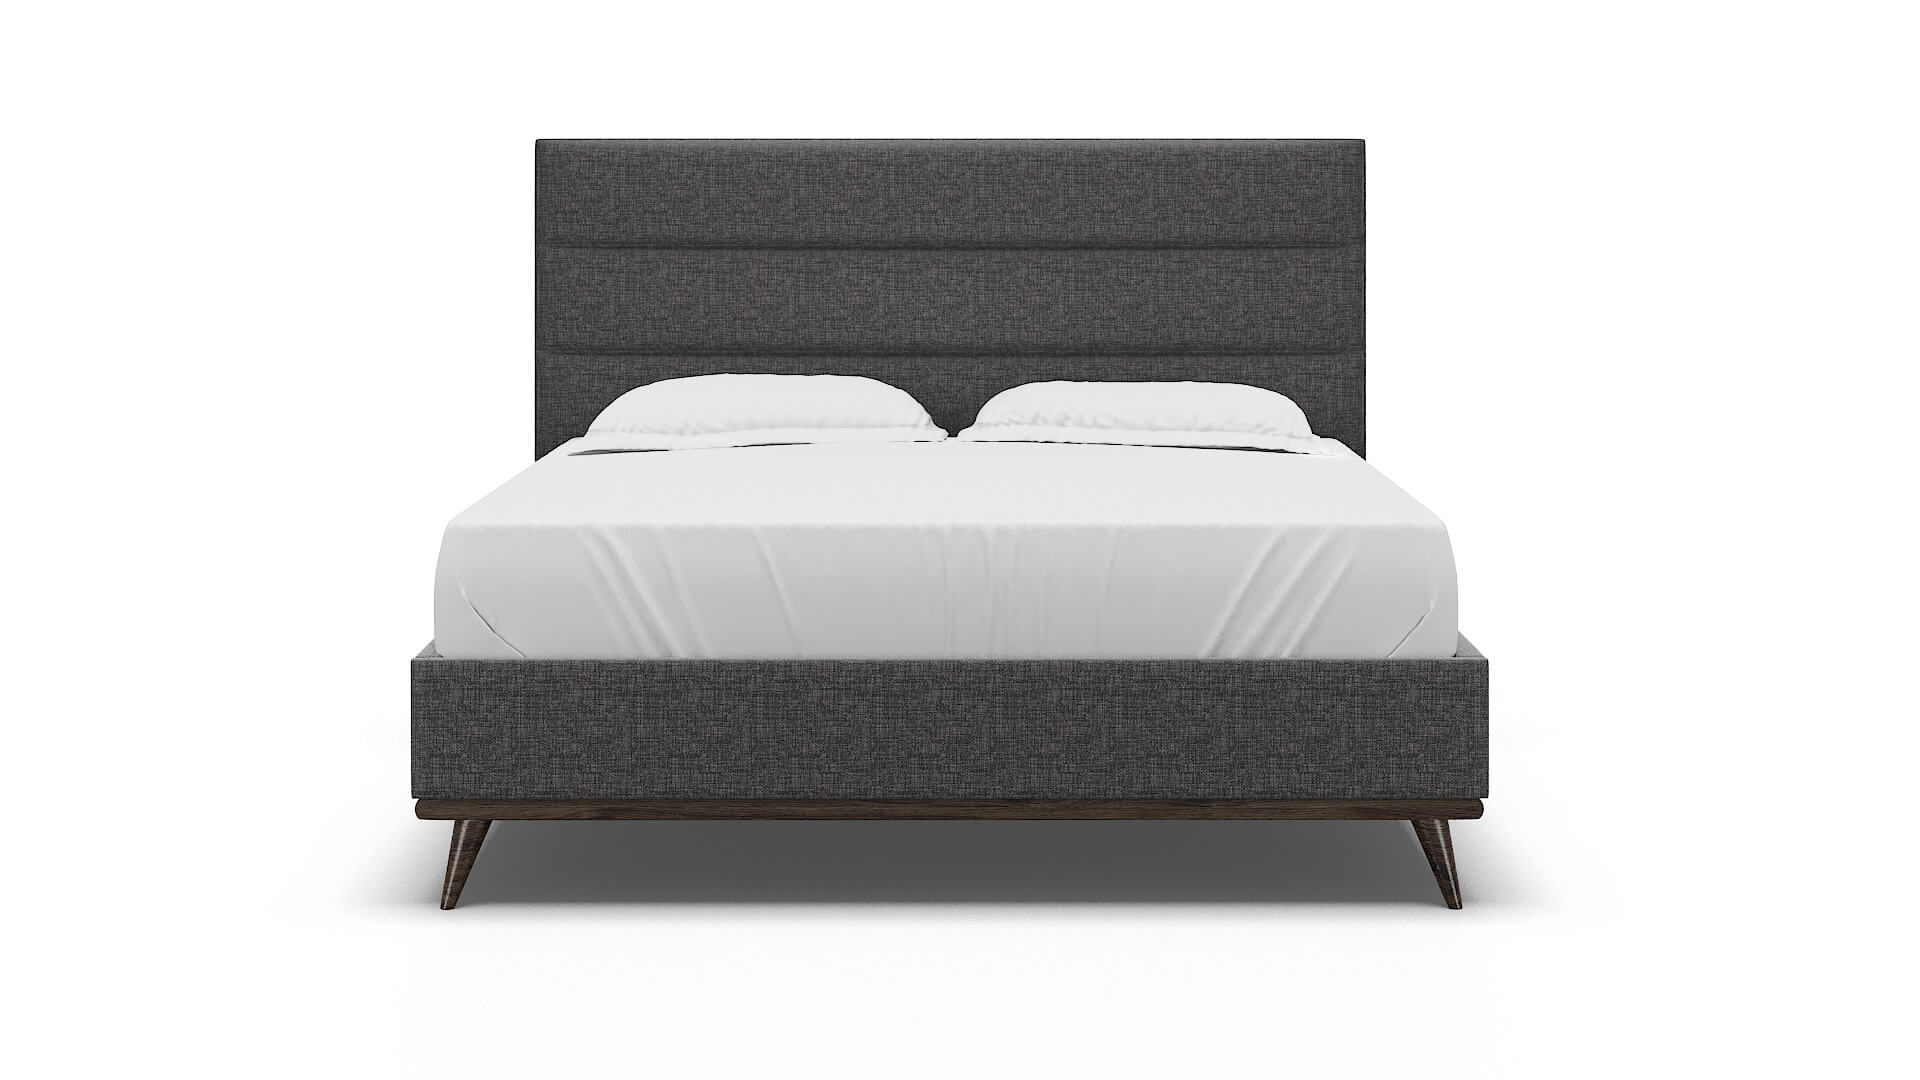 Isla Curious Pacific Bed King espresso legs 1